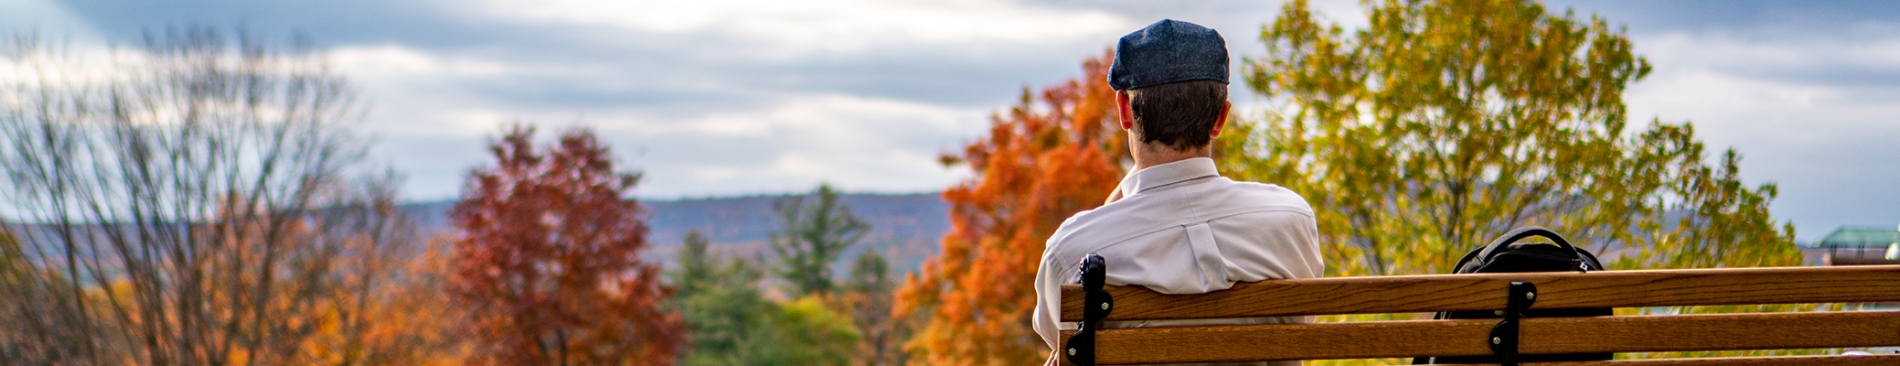 A student admires the fall foliage on the New England campus.